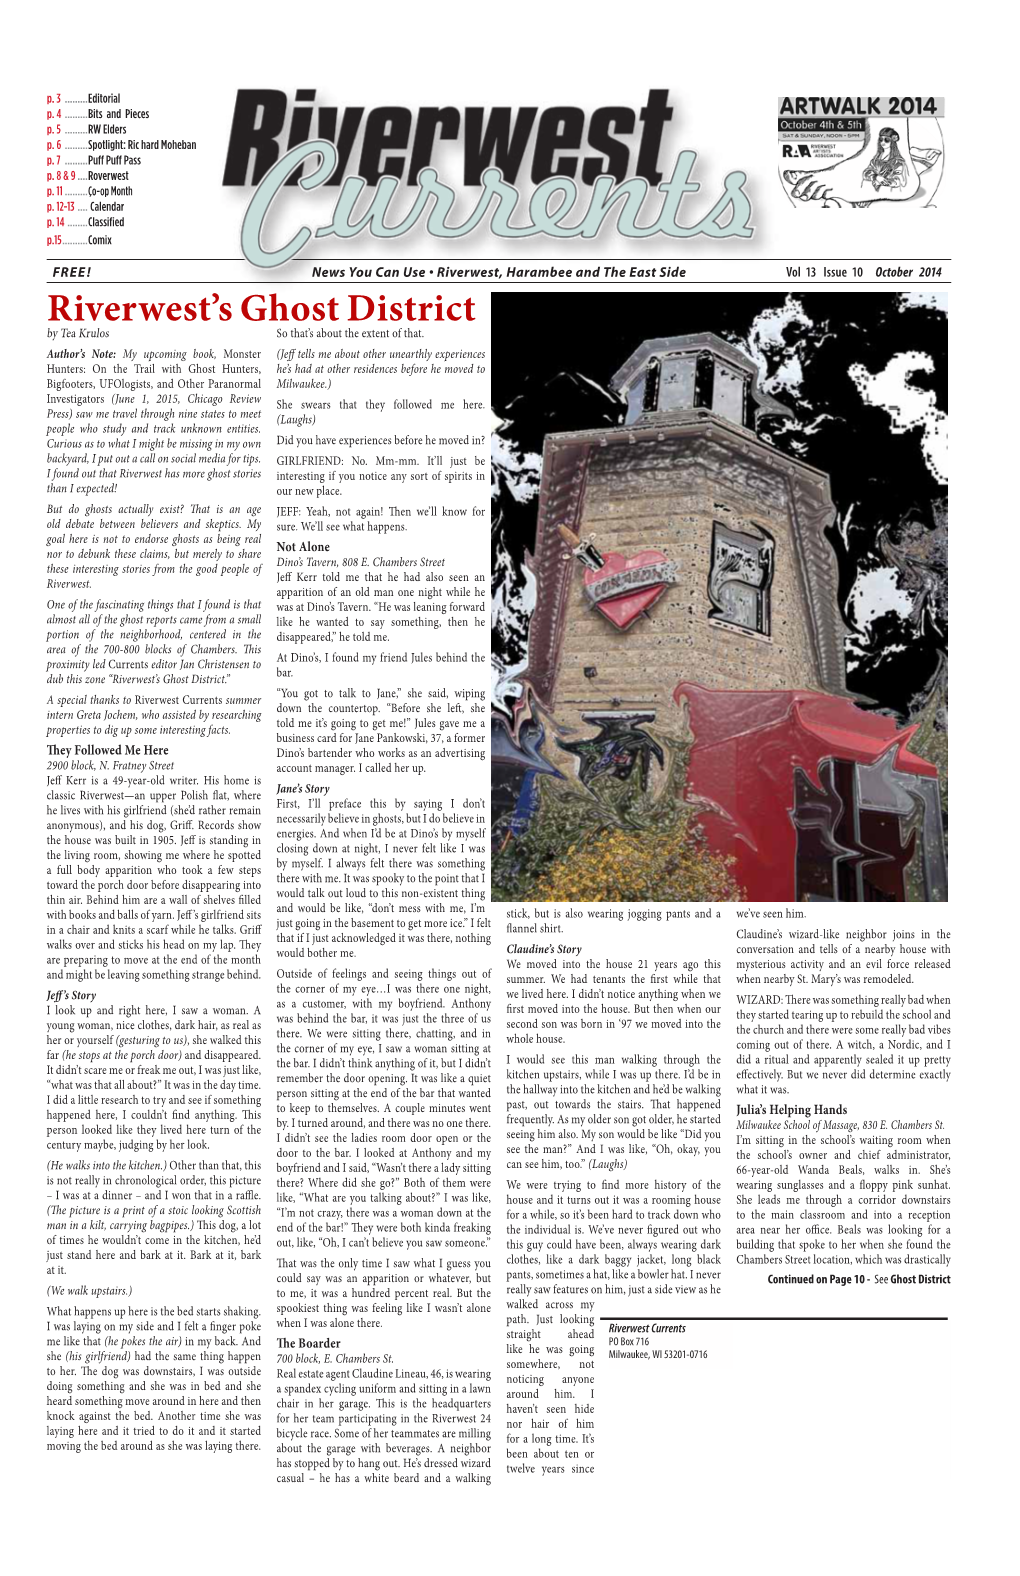 Riverwest's Ghost District